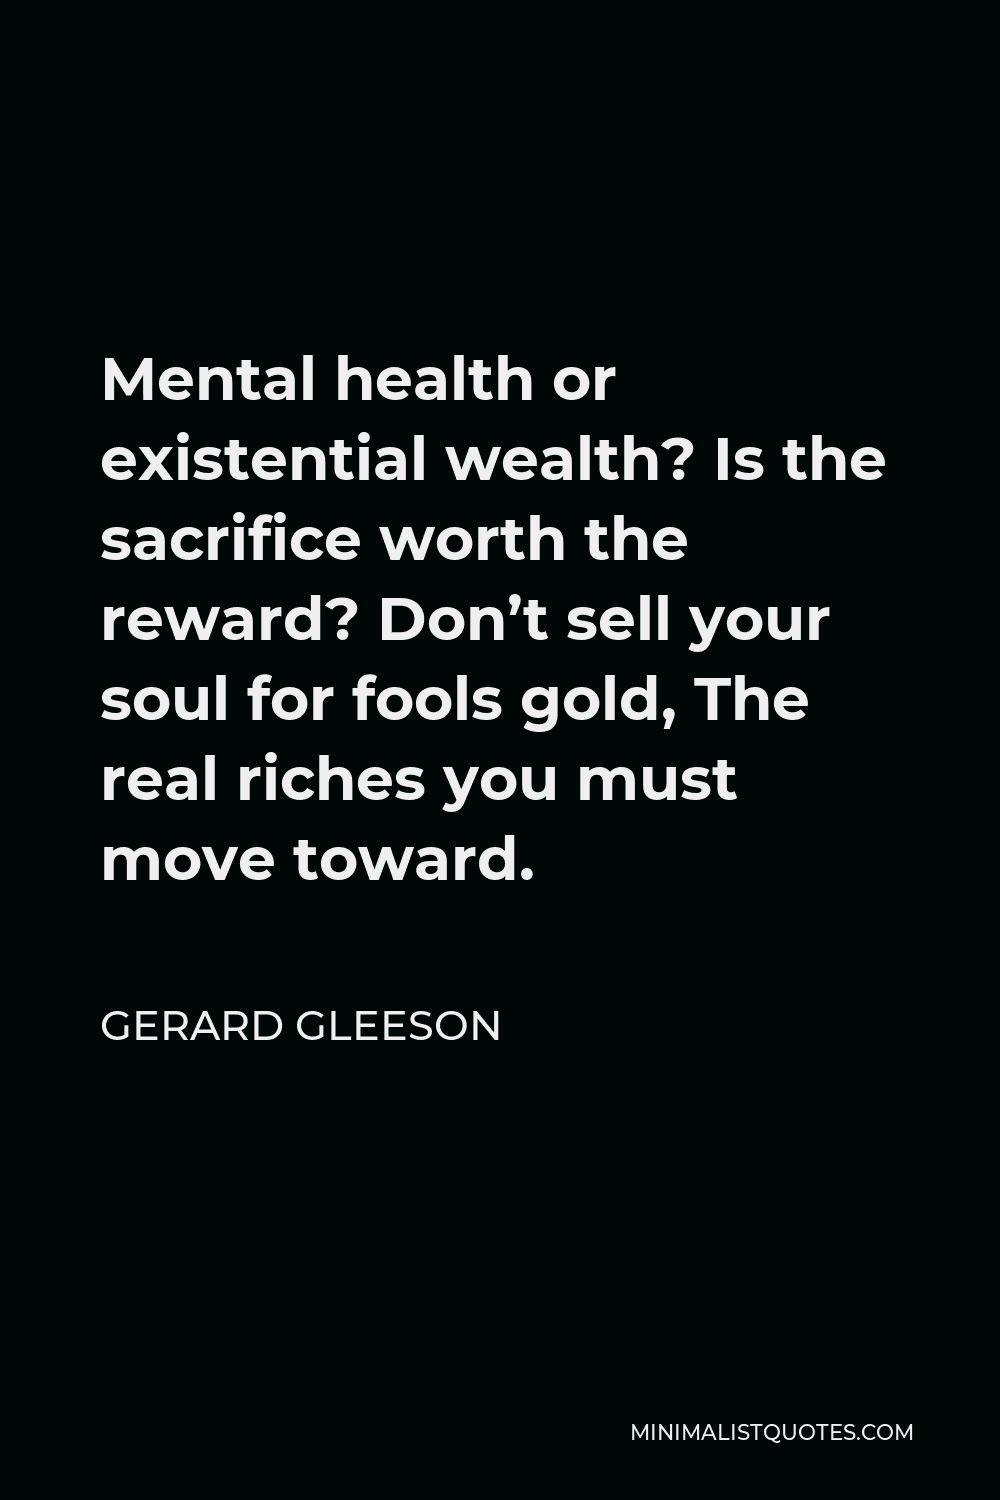 Gerard Gleeson Quote - Mental health or existential wealth? Is the sacrifice worth the reward? Don’t sell your soul for fools gold, The real riches you must move toward.